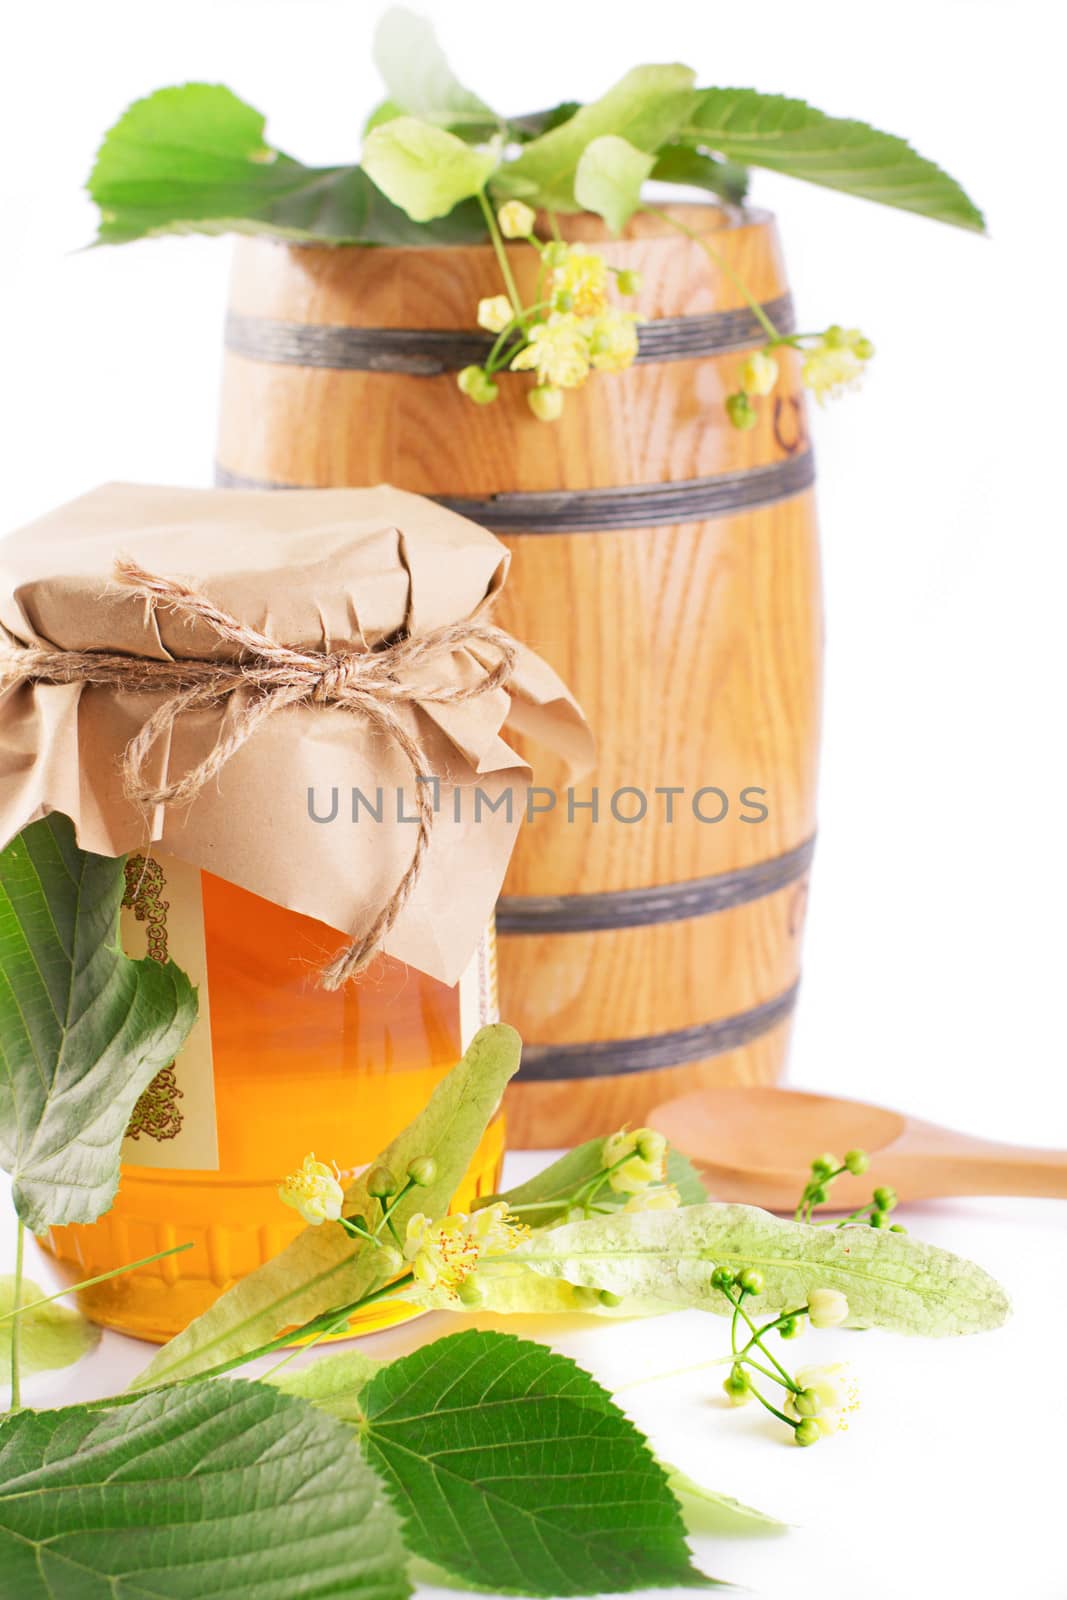 Linden honey jar and barrel with flowers by Angel_a